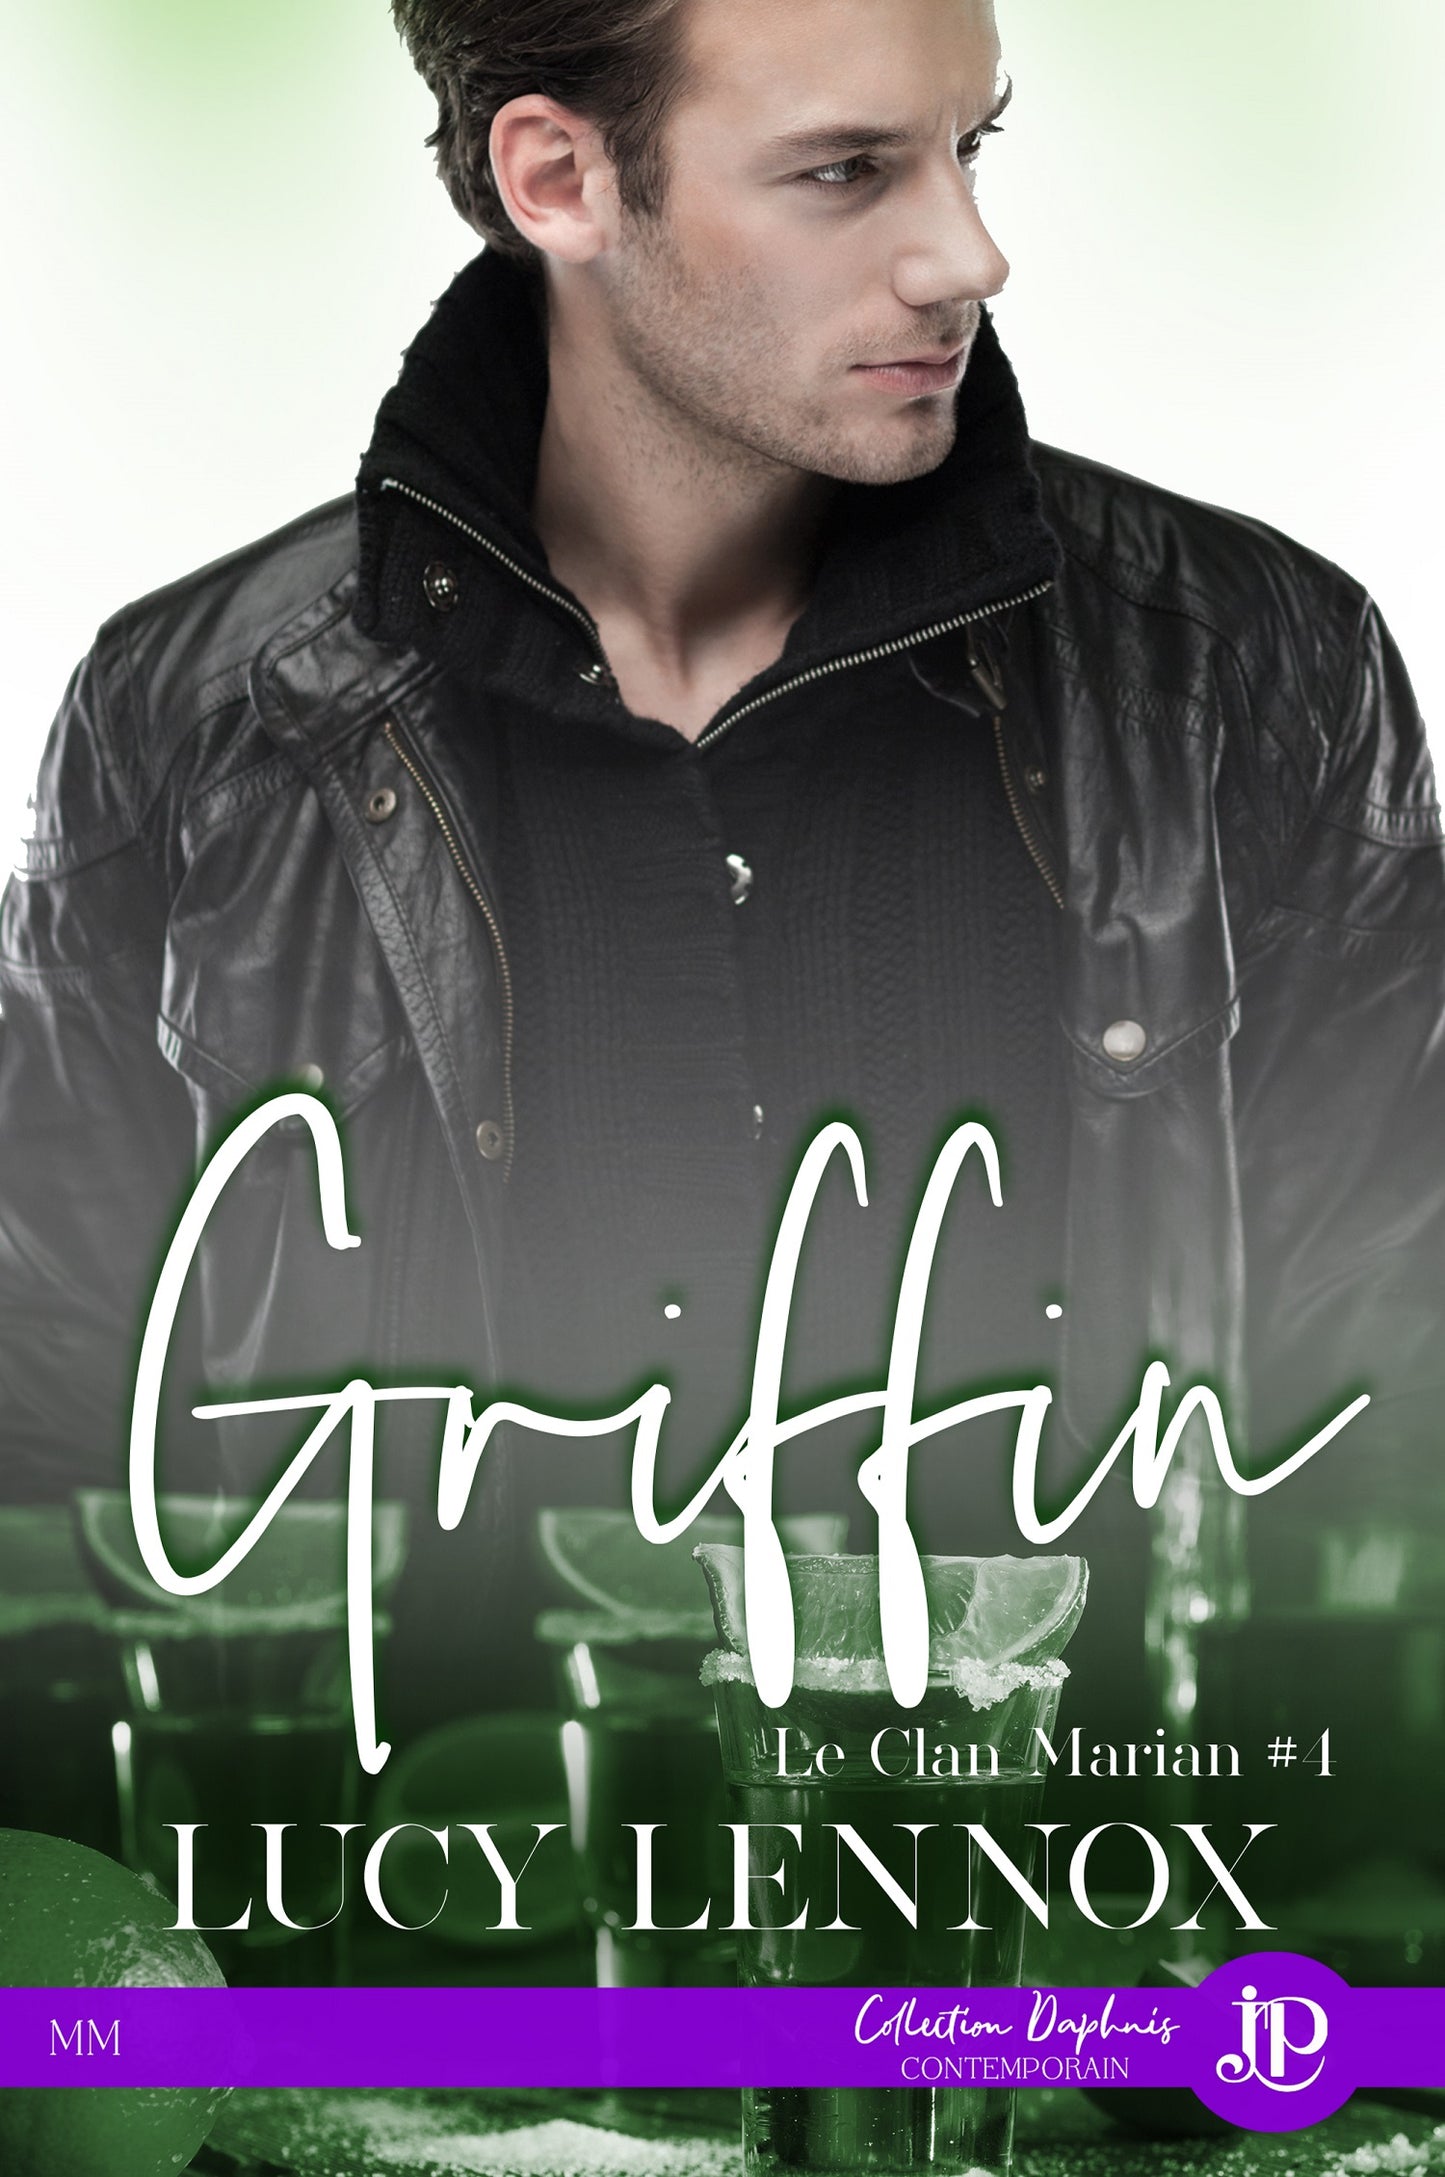 Le clan Marian #4 - Griffin